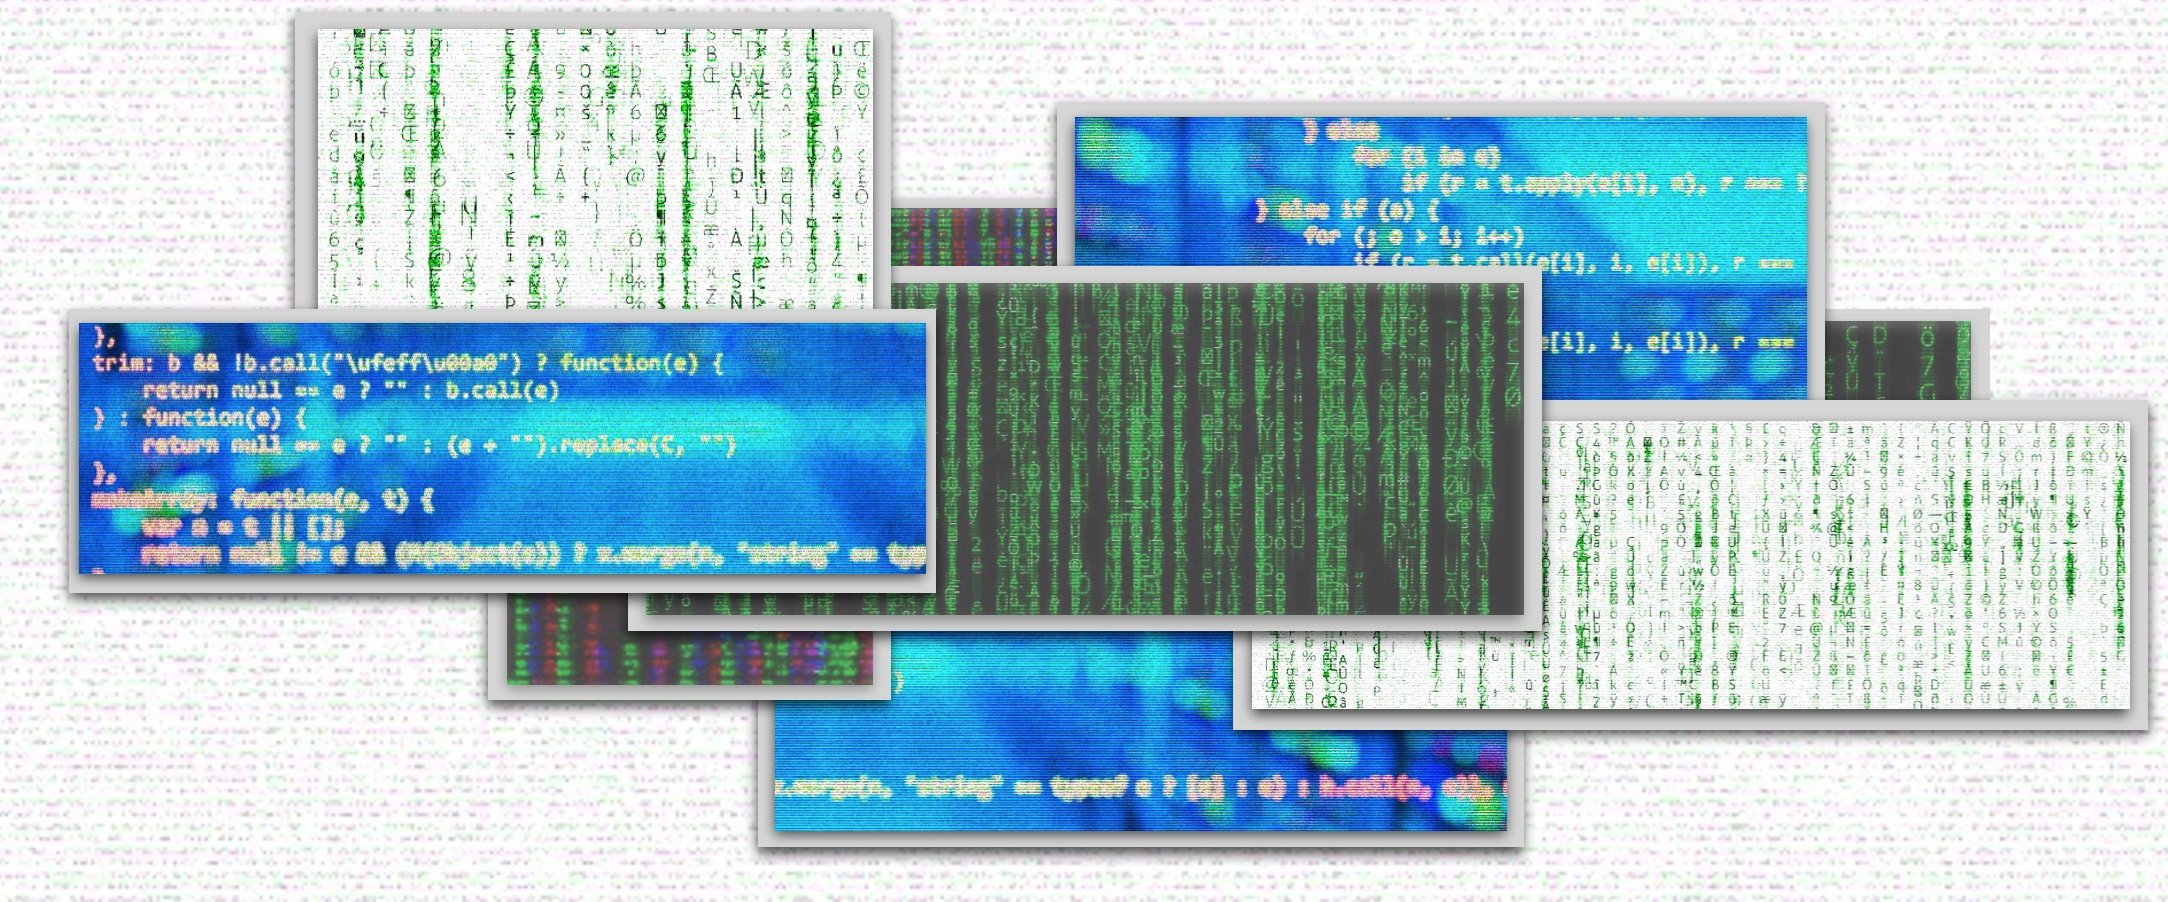 Images of Matrix-style code